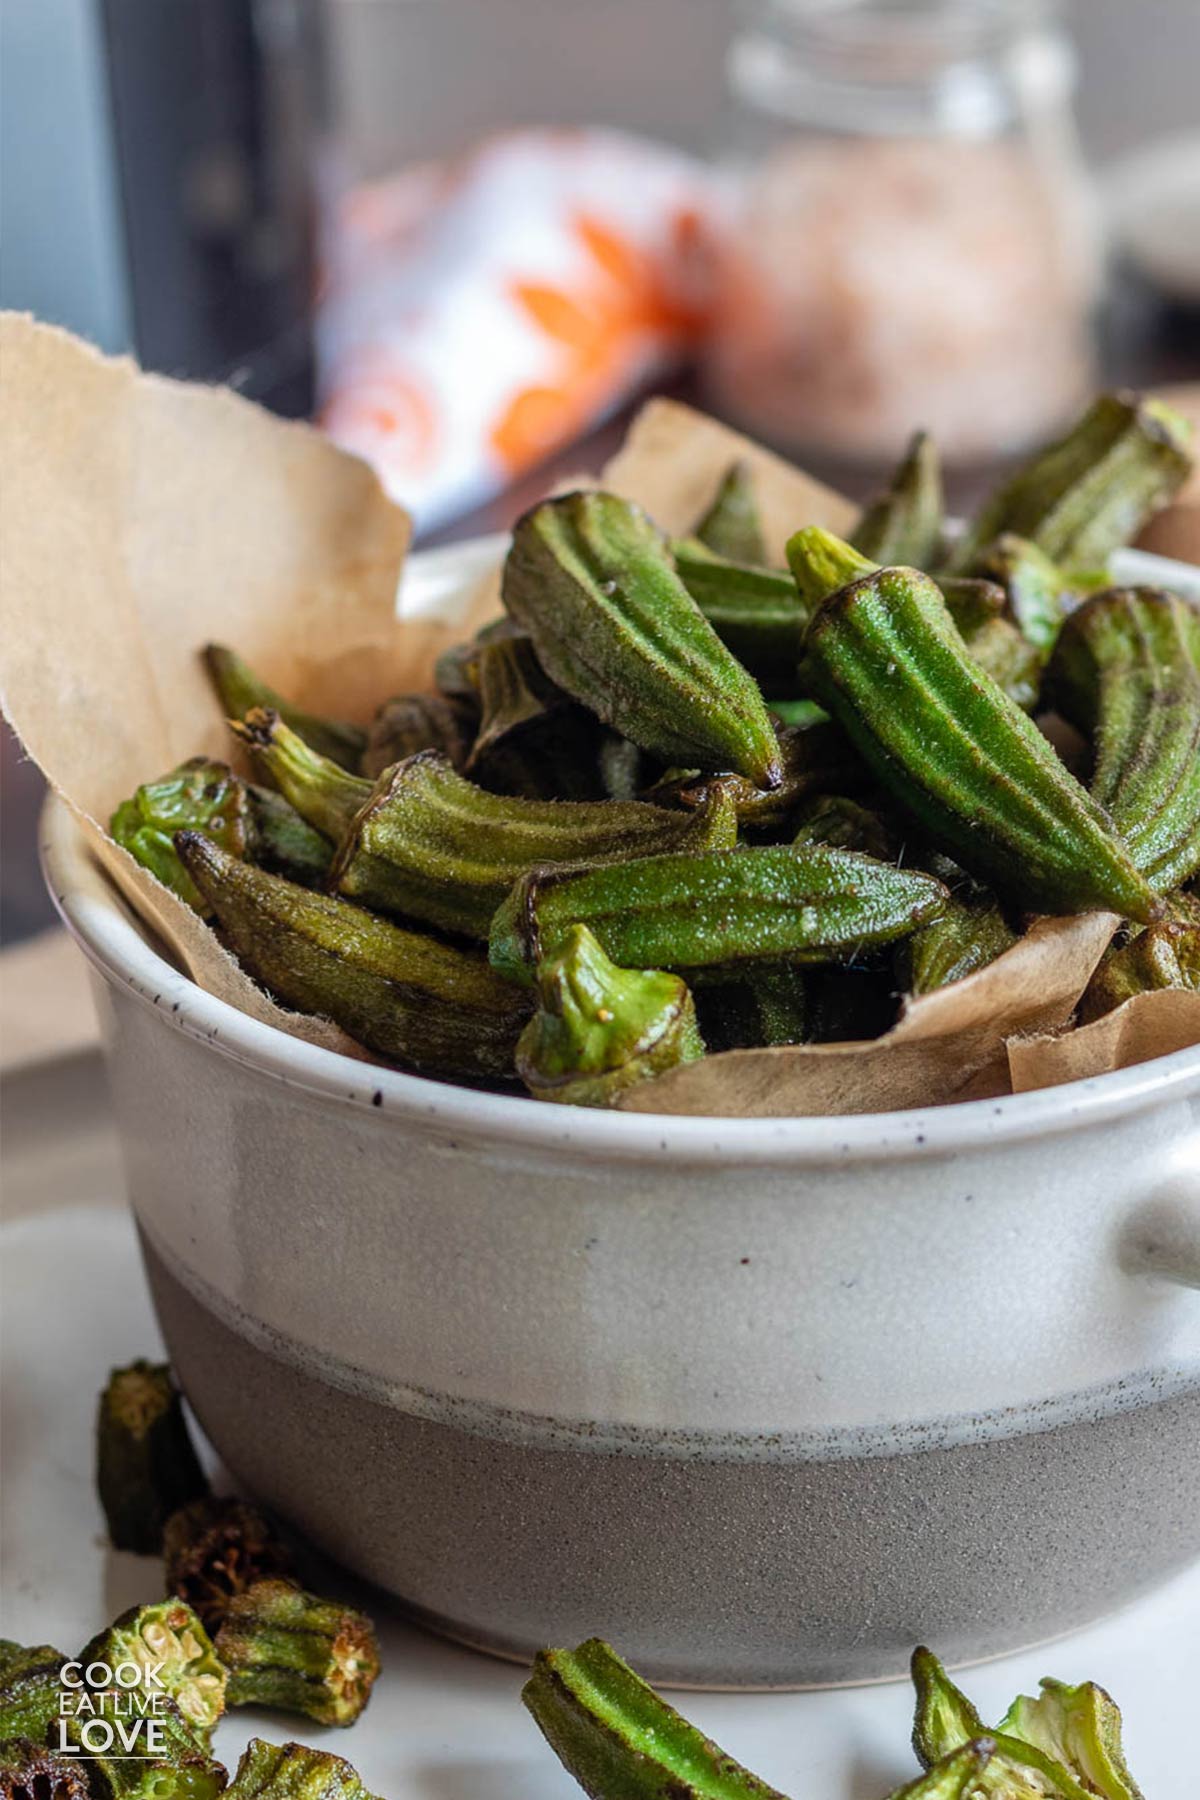 Air fried okra in a white and tan bowl on the table.